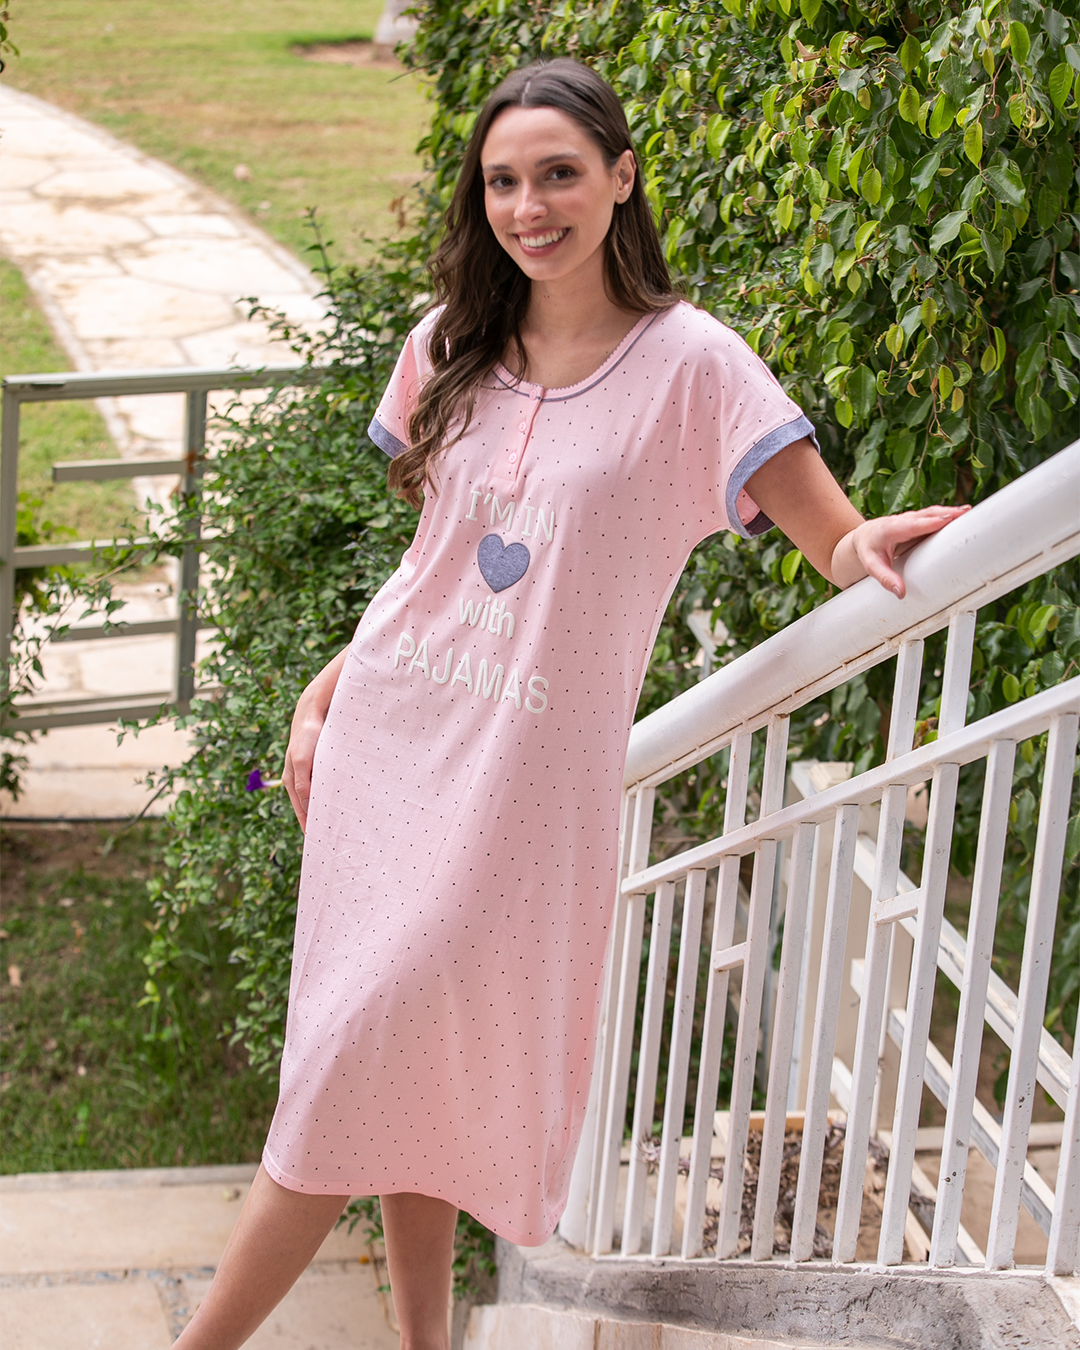 im in with pajamas women's polka dot nightgown